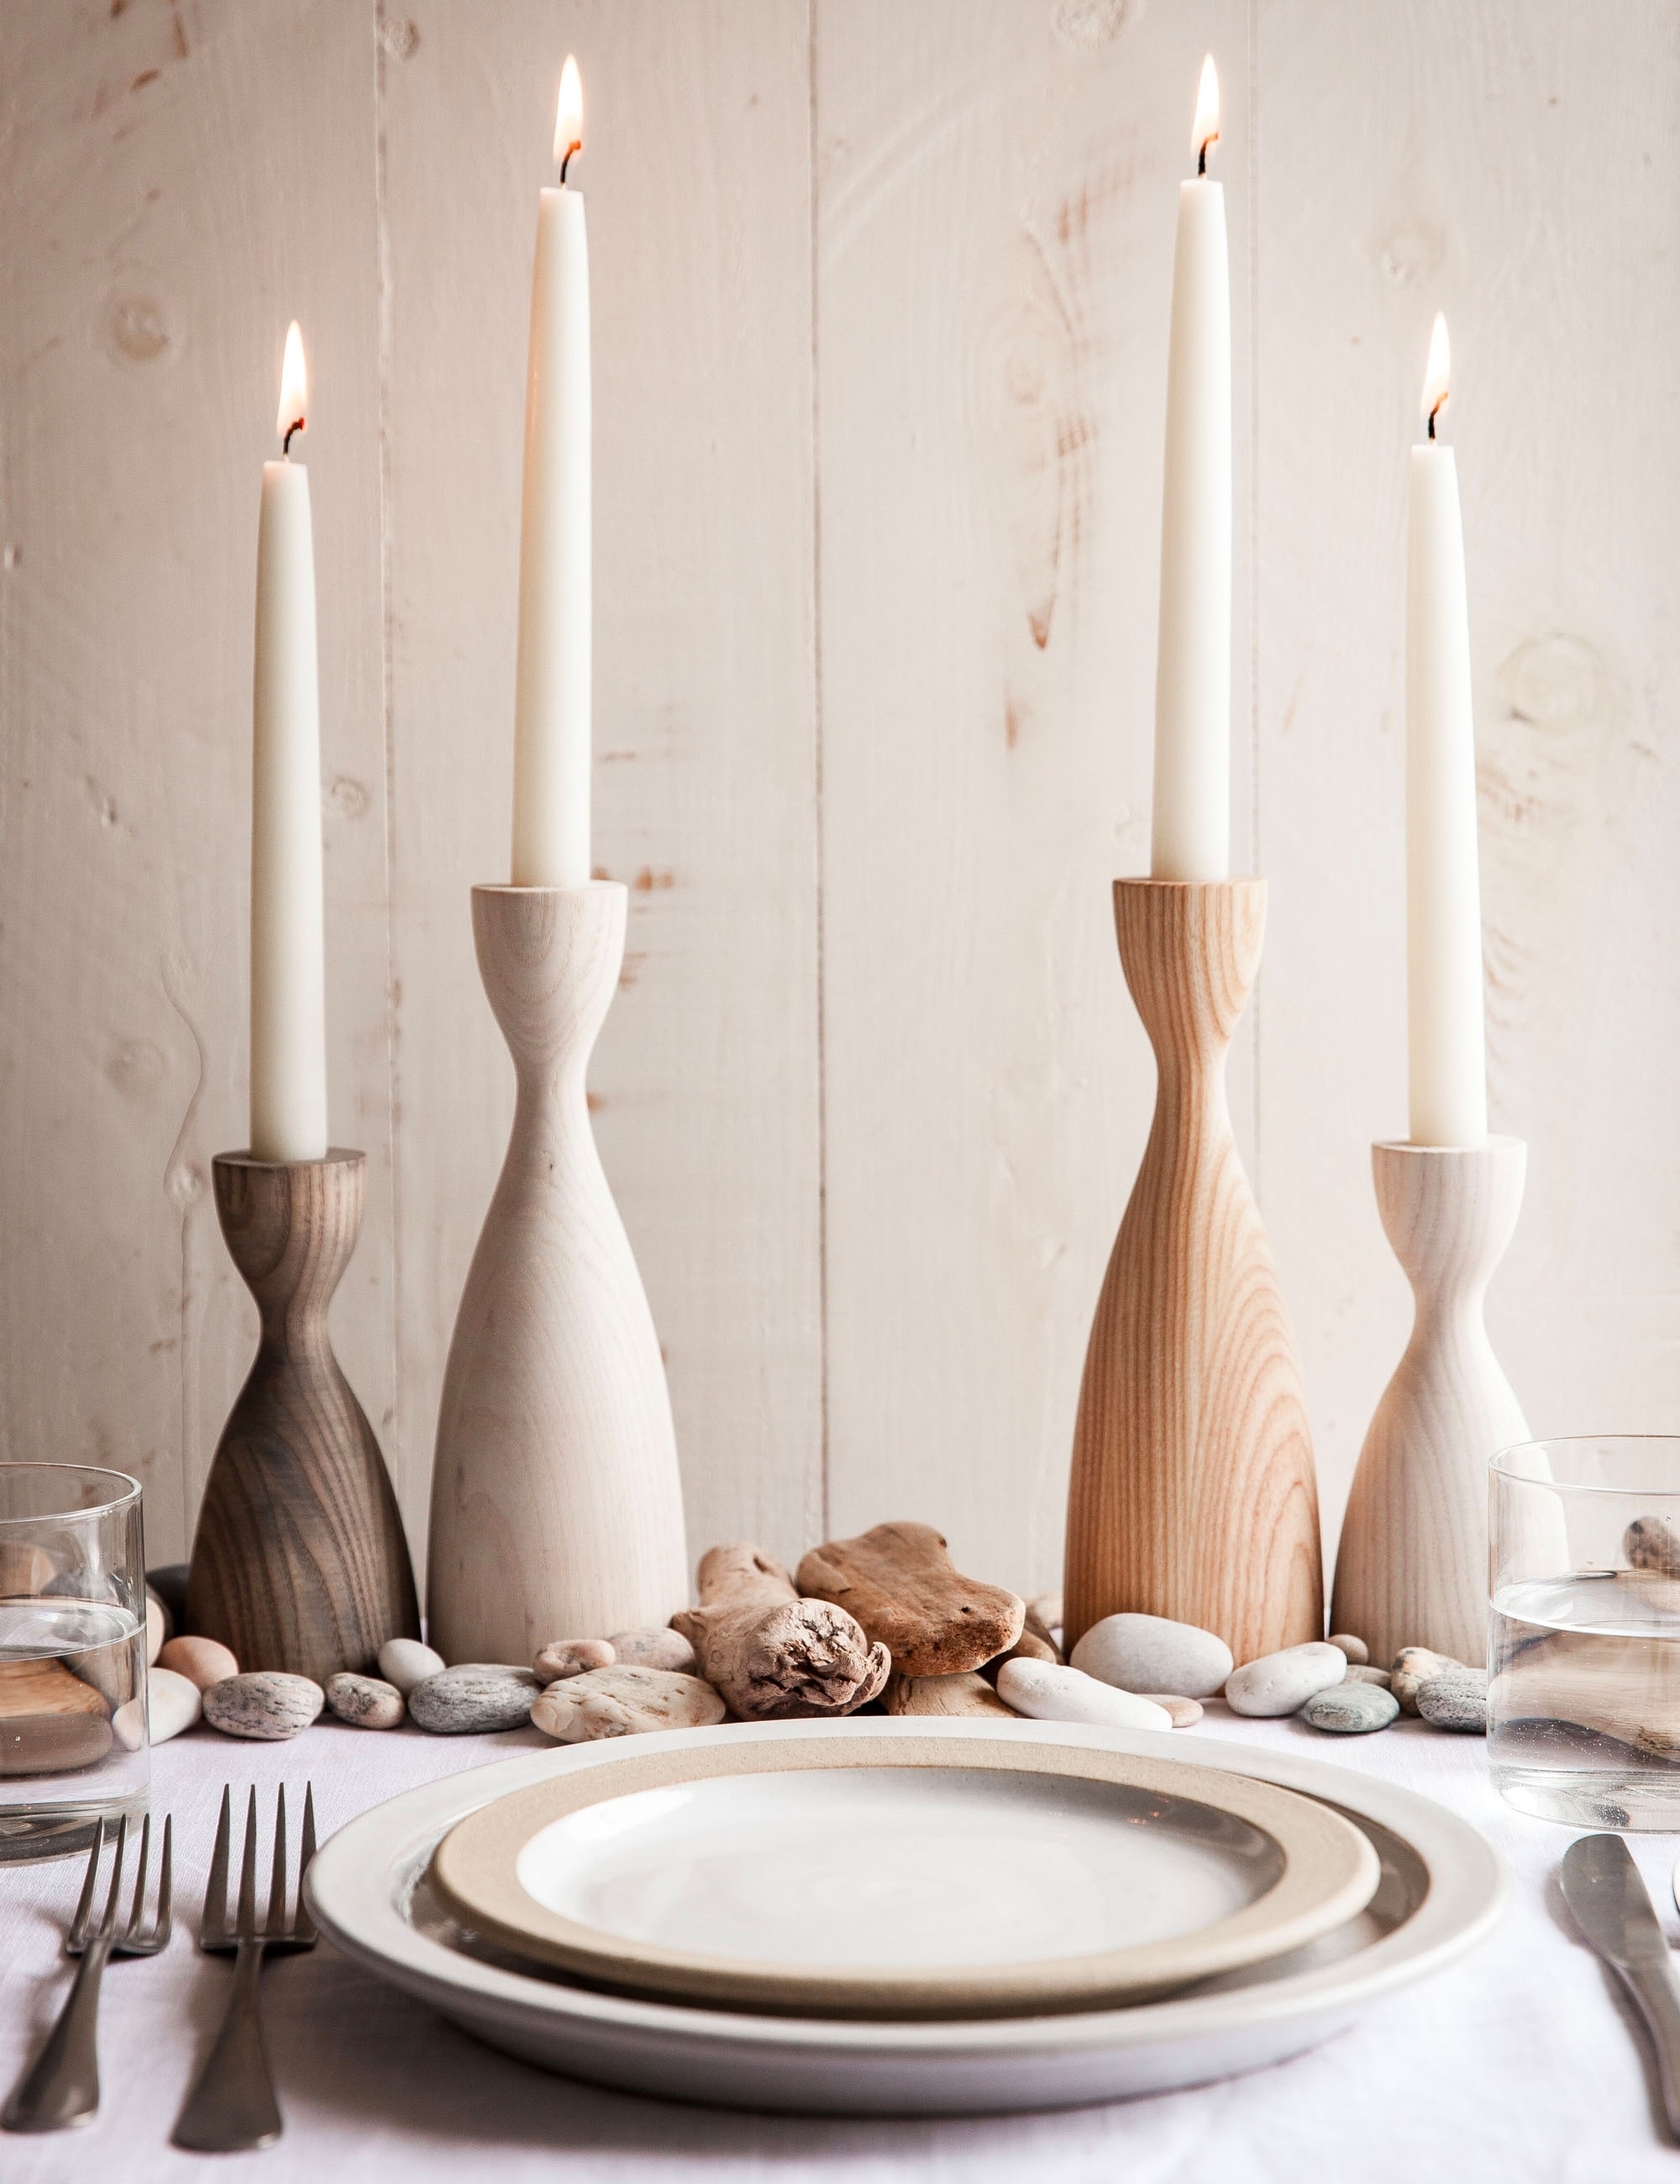 Pantry Candlestick by Farmhouse Pottery - Image 1